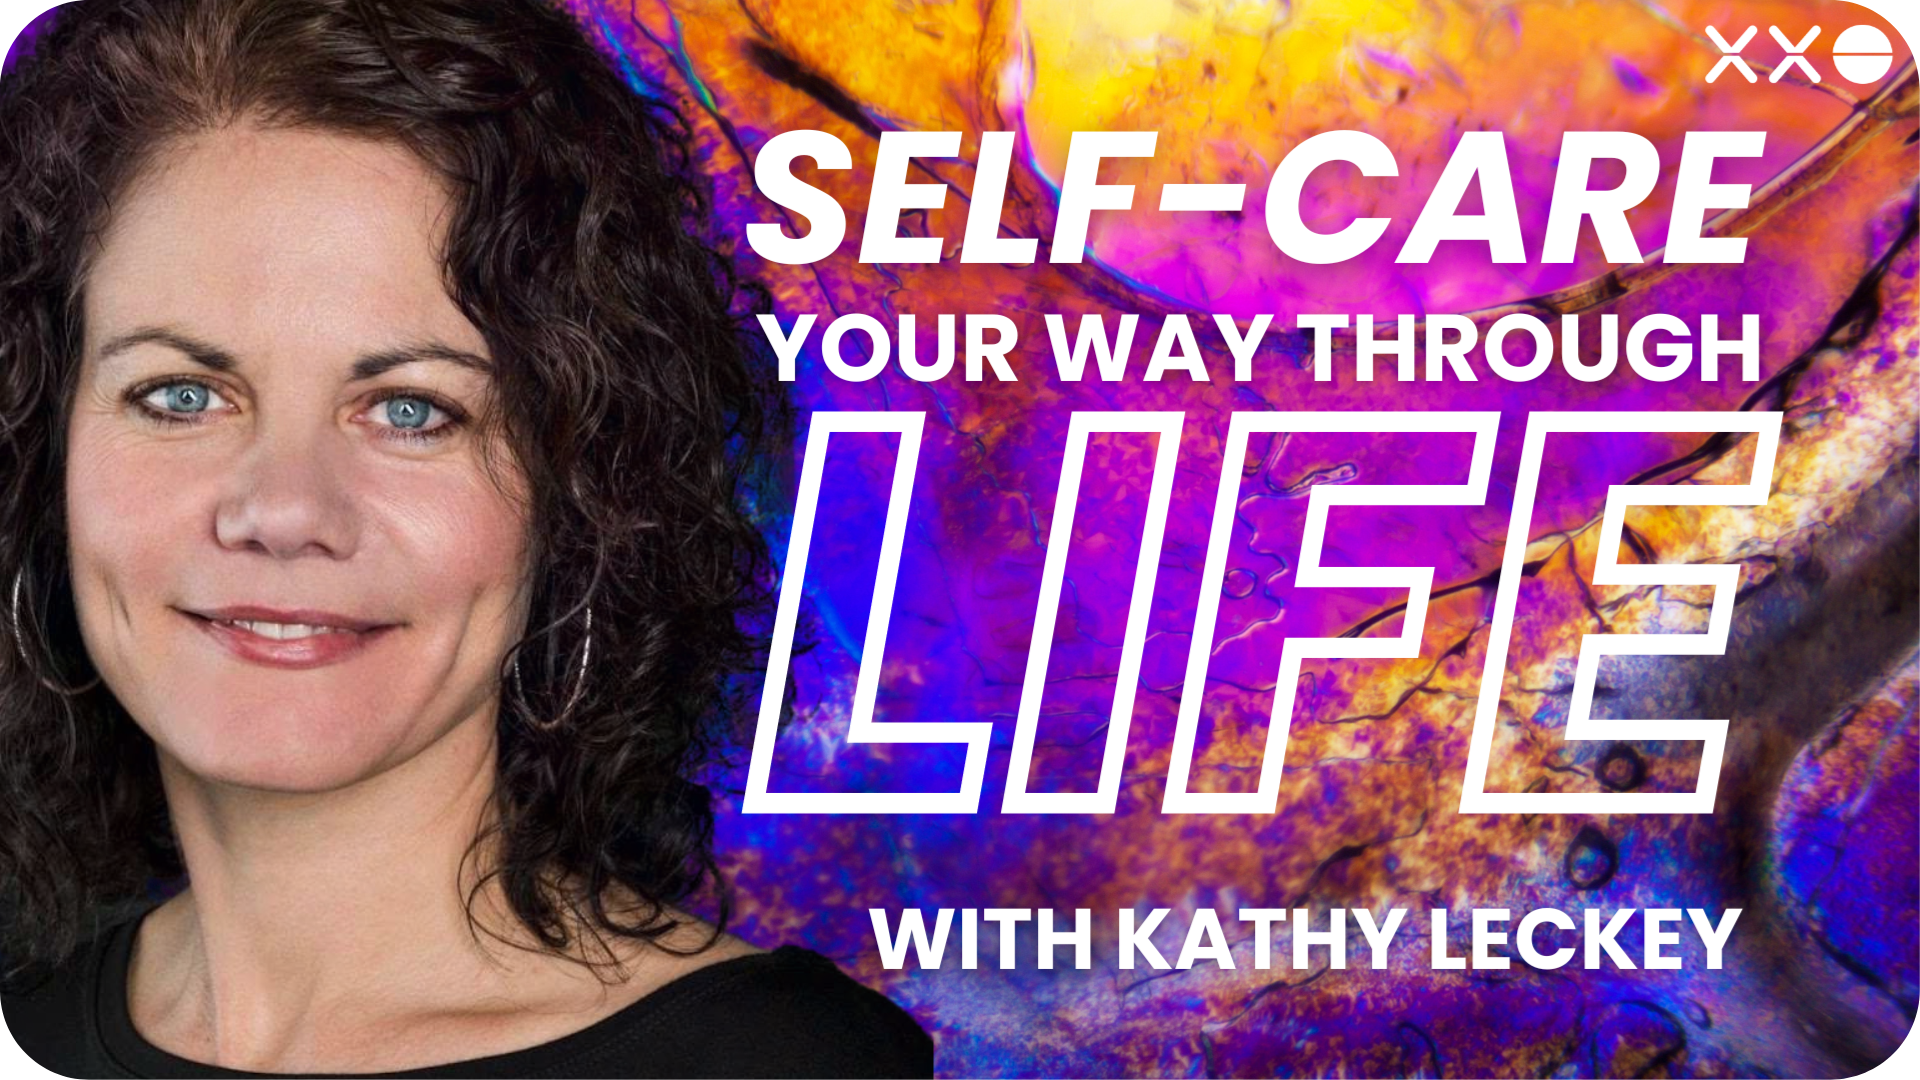 XXO CONNECT KATHY LECKEY SELFCARE YOUR WAY THROUGH LIFE.png